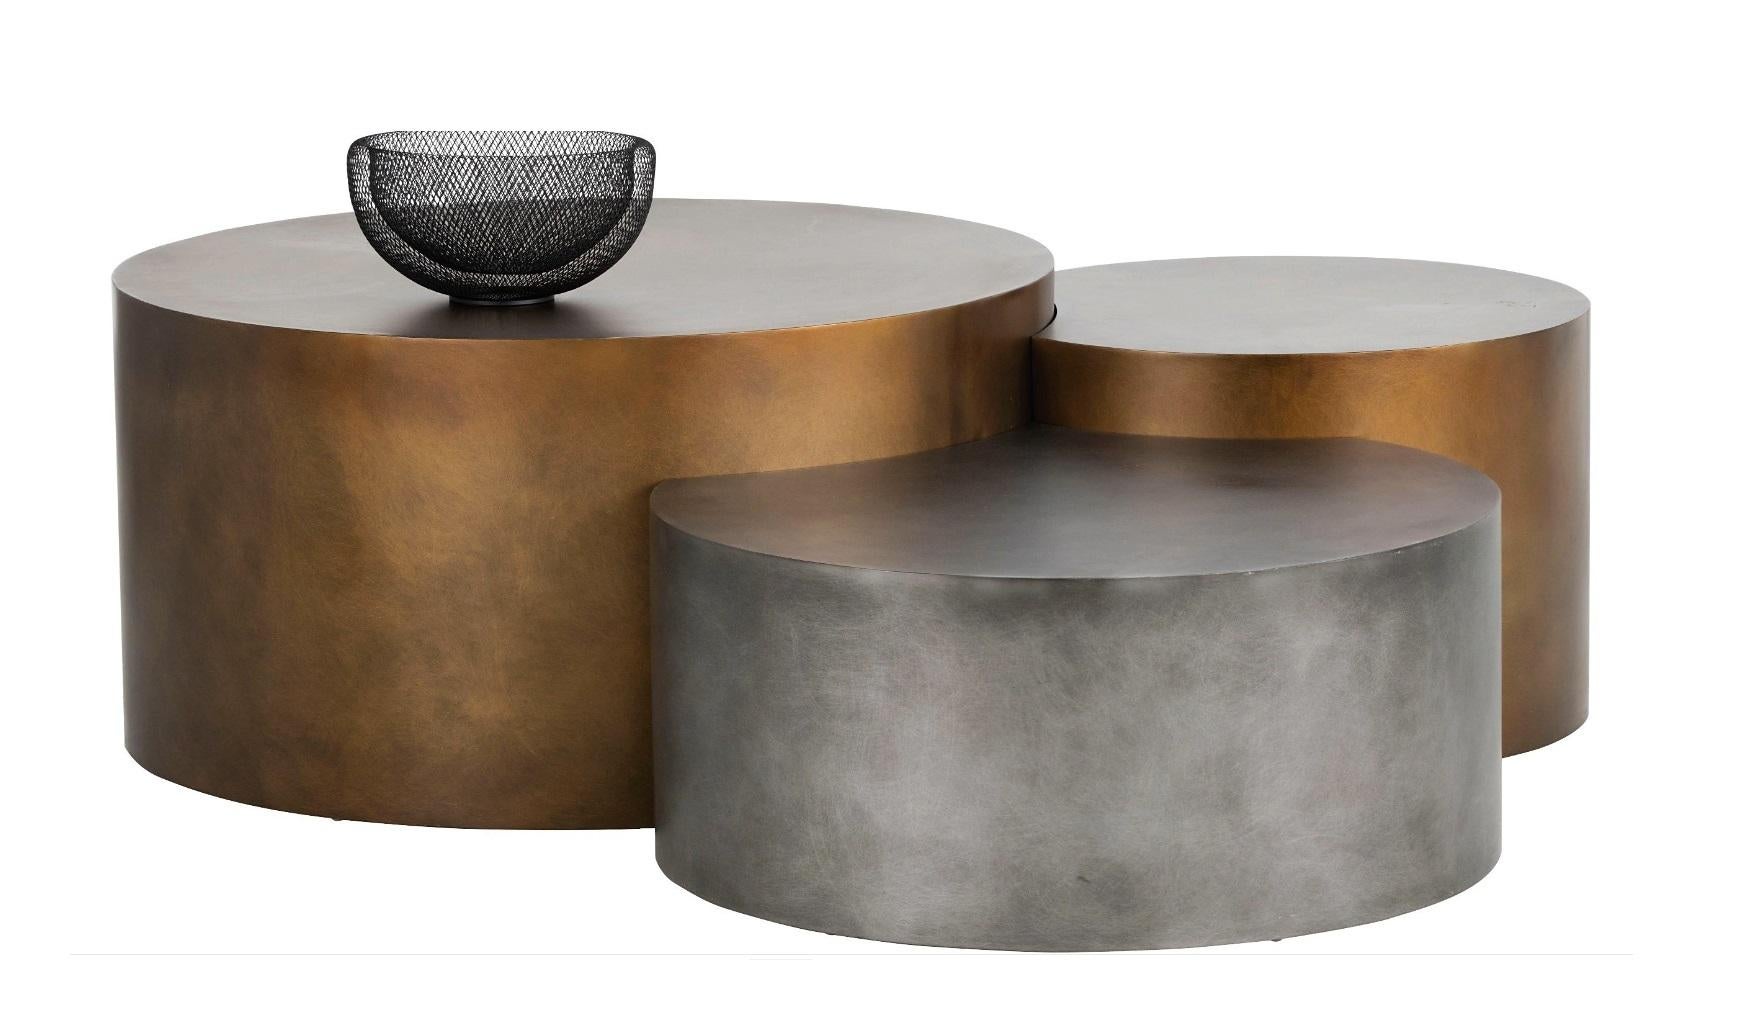 Available as a set of three contemporary coffee tables - this trio is crafted from steel in varying brass and nickel finishes. 

An elegant and playful design that can easily be integrated in a large variety of interiors, the tables come in three